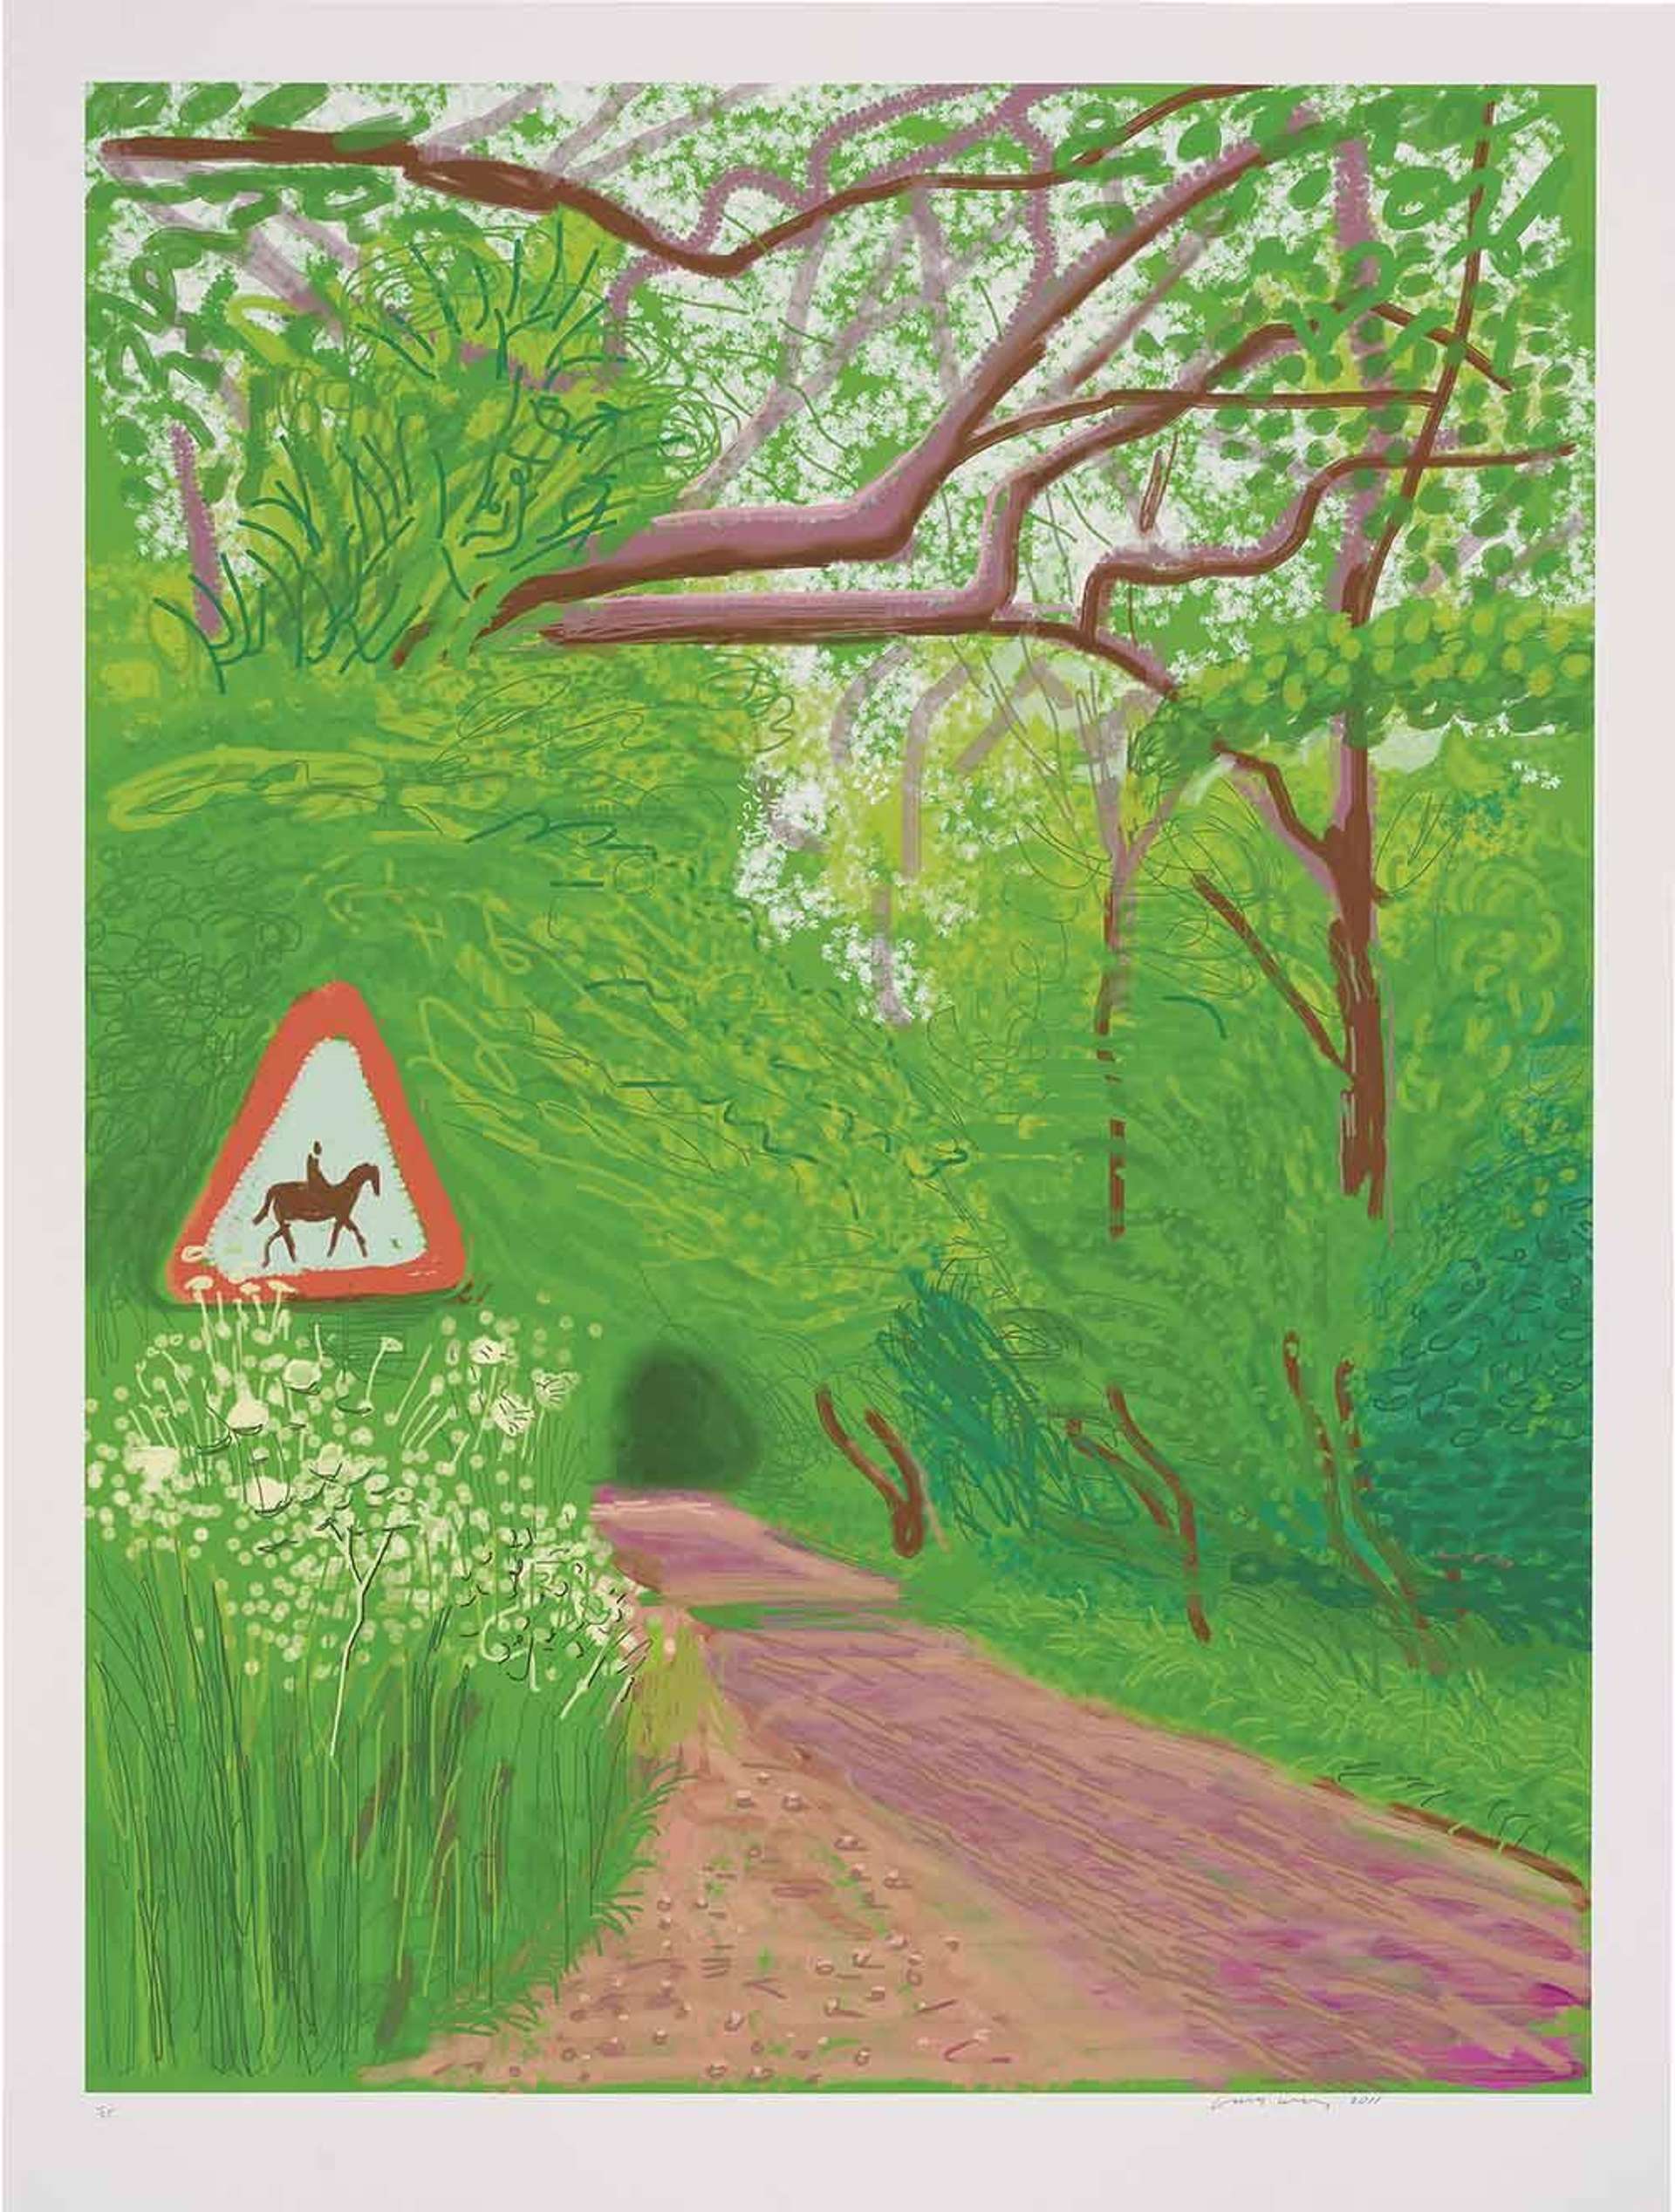 The Arrival of Spring In Woldgate East Yorkshire30th May 2011 - by David Hockney 